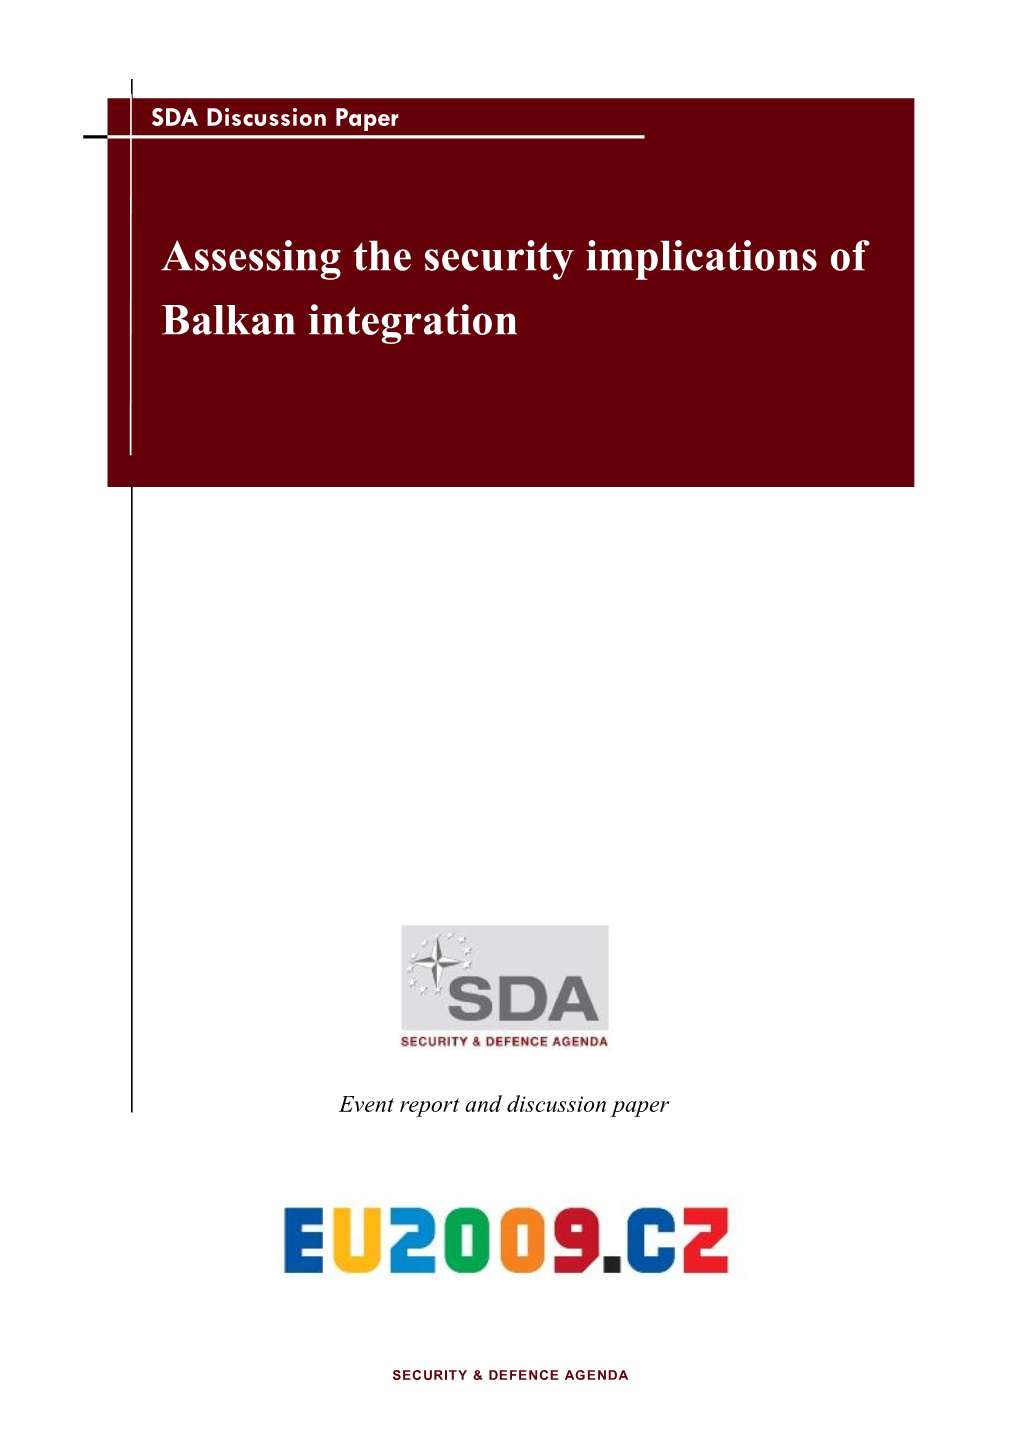 Assessing the Security Implications of Balkan Integration